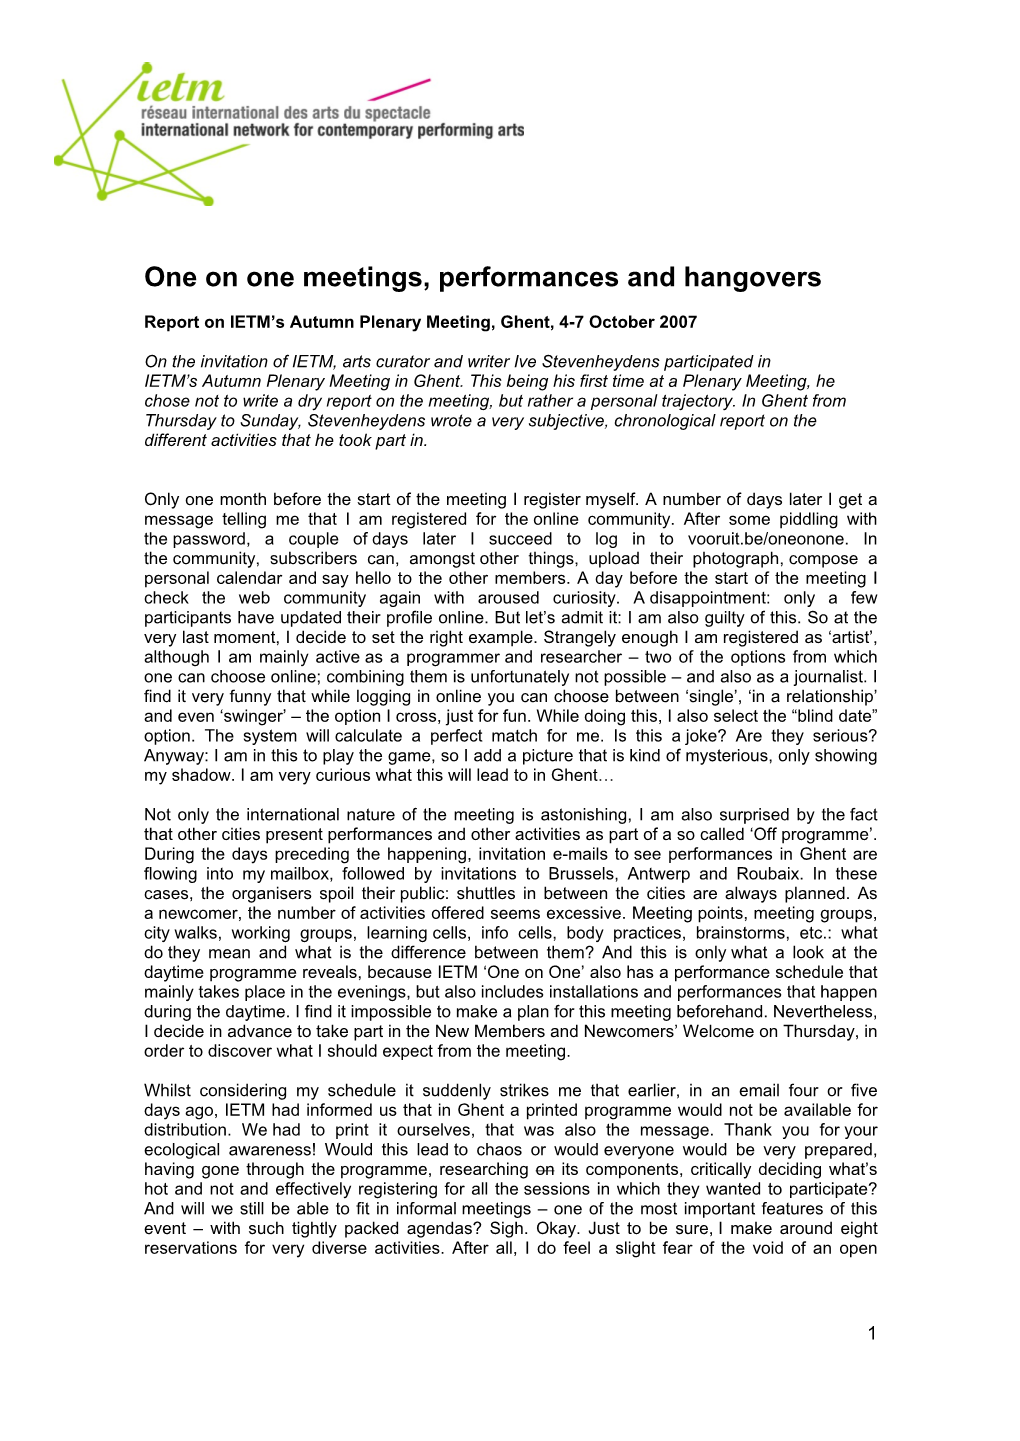 One on One Meetings, Performances and Hangovers